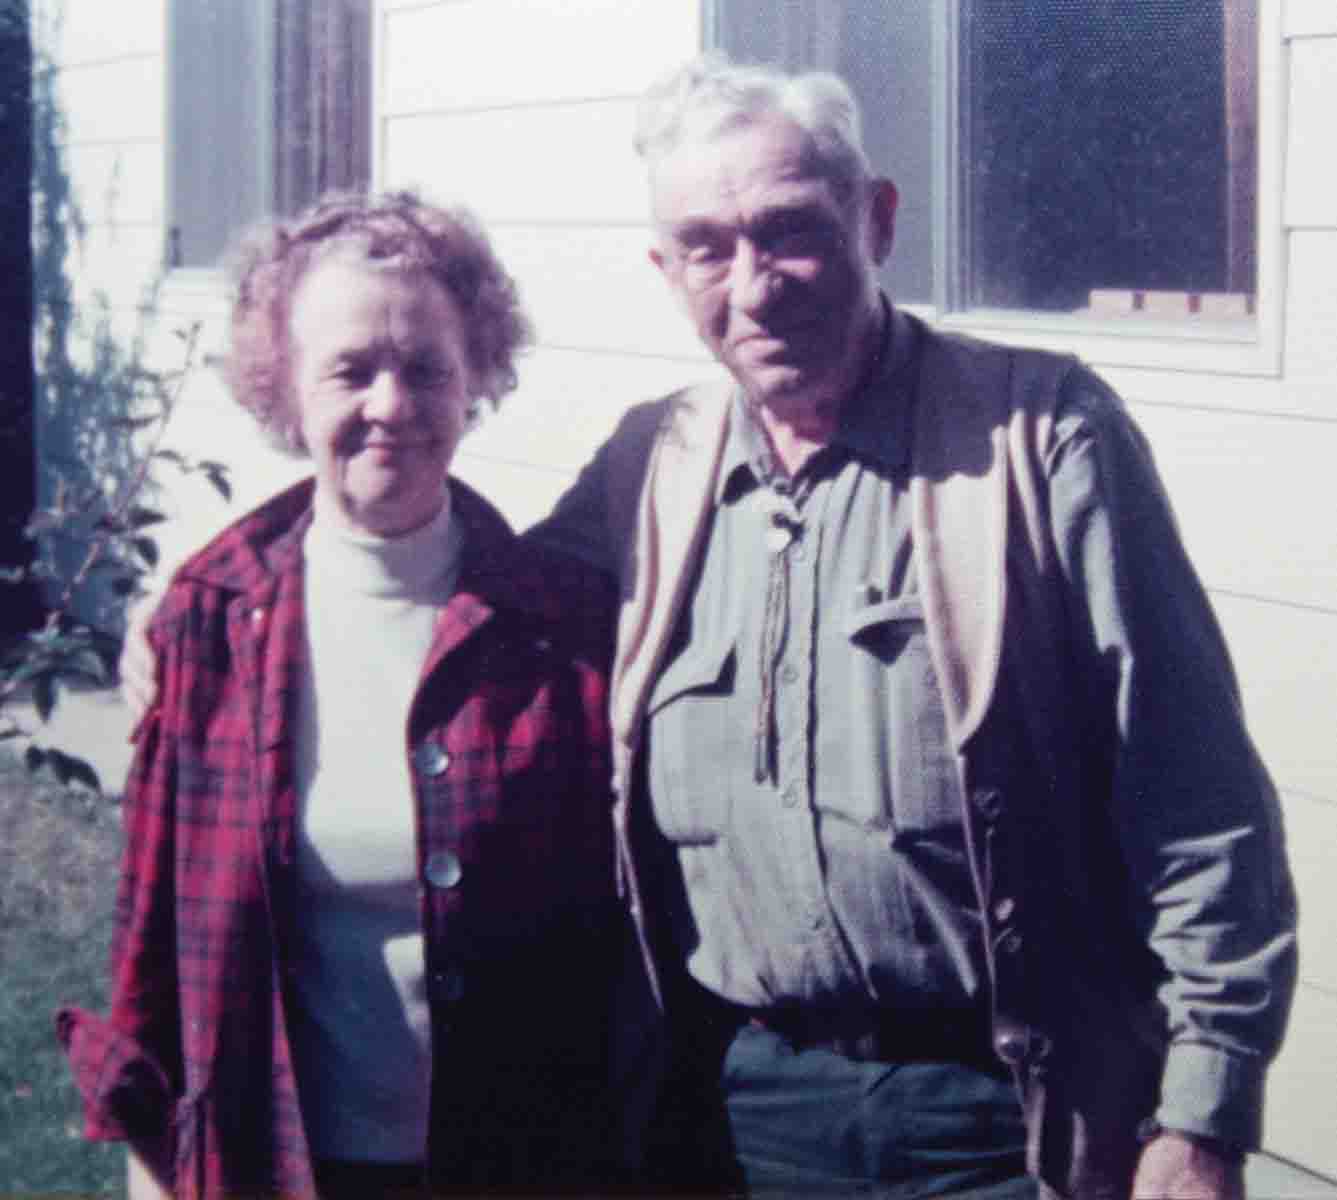 Elmer Keith and his wife Lorraine posed for this photo in 1975, during Harvey’s first visit to their home in Salmon, Idaho.